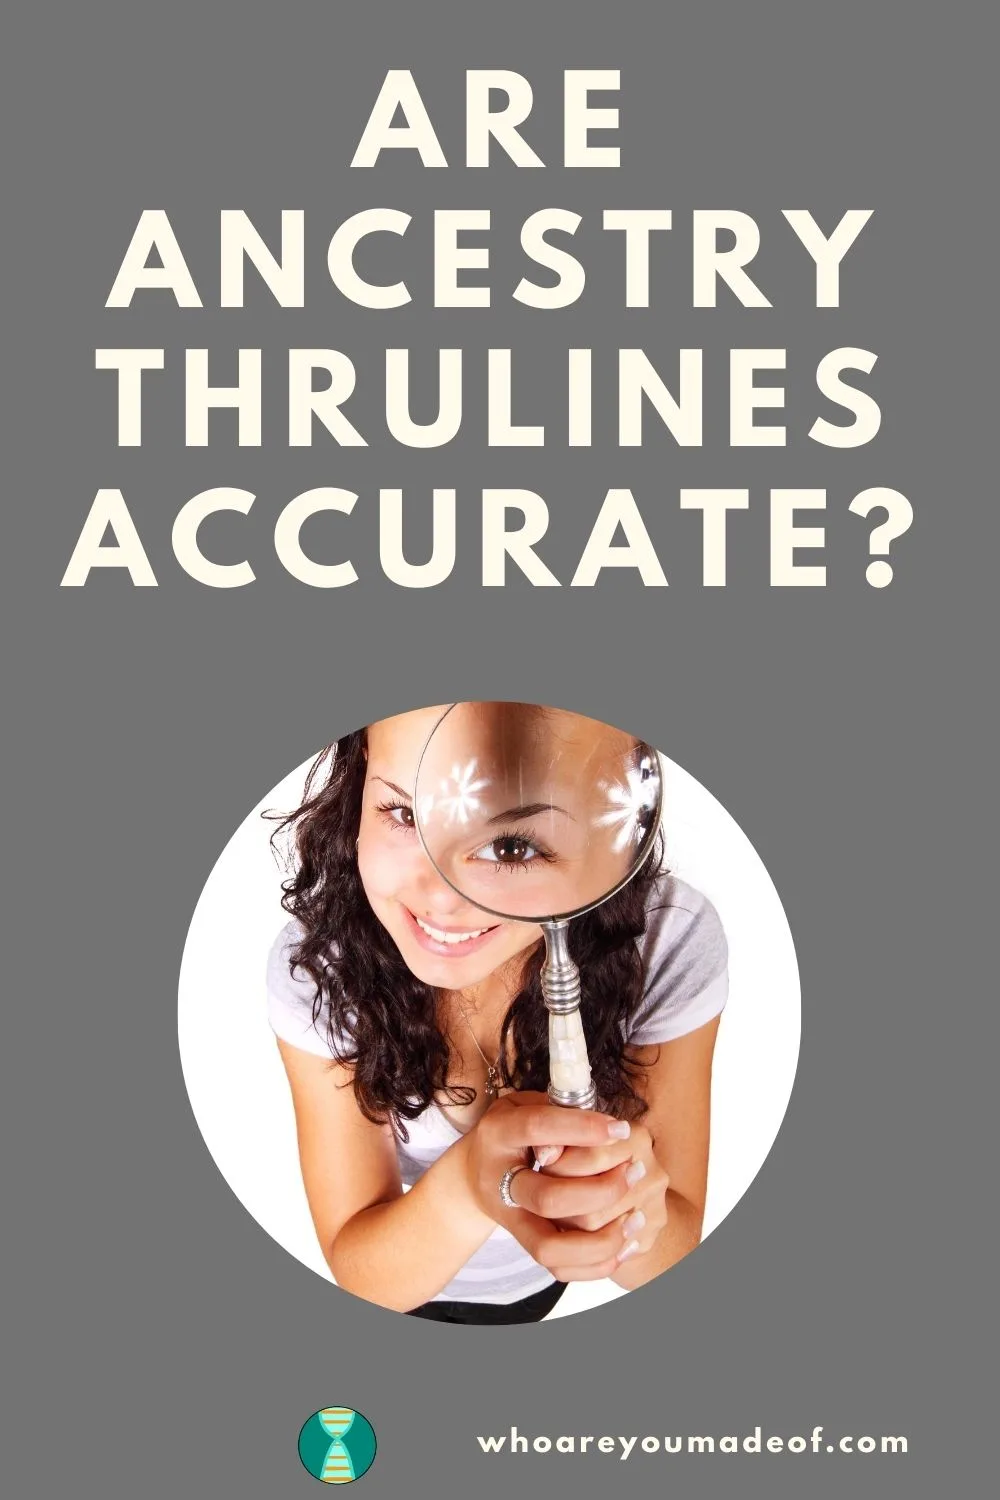 Are Ancestry ThruLines Accurate Pinterest image with woman looking through magnifying glass